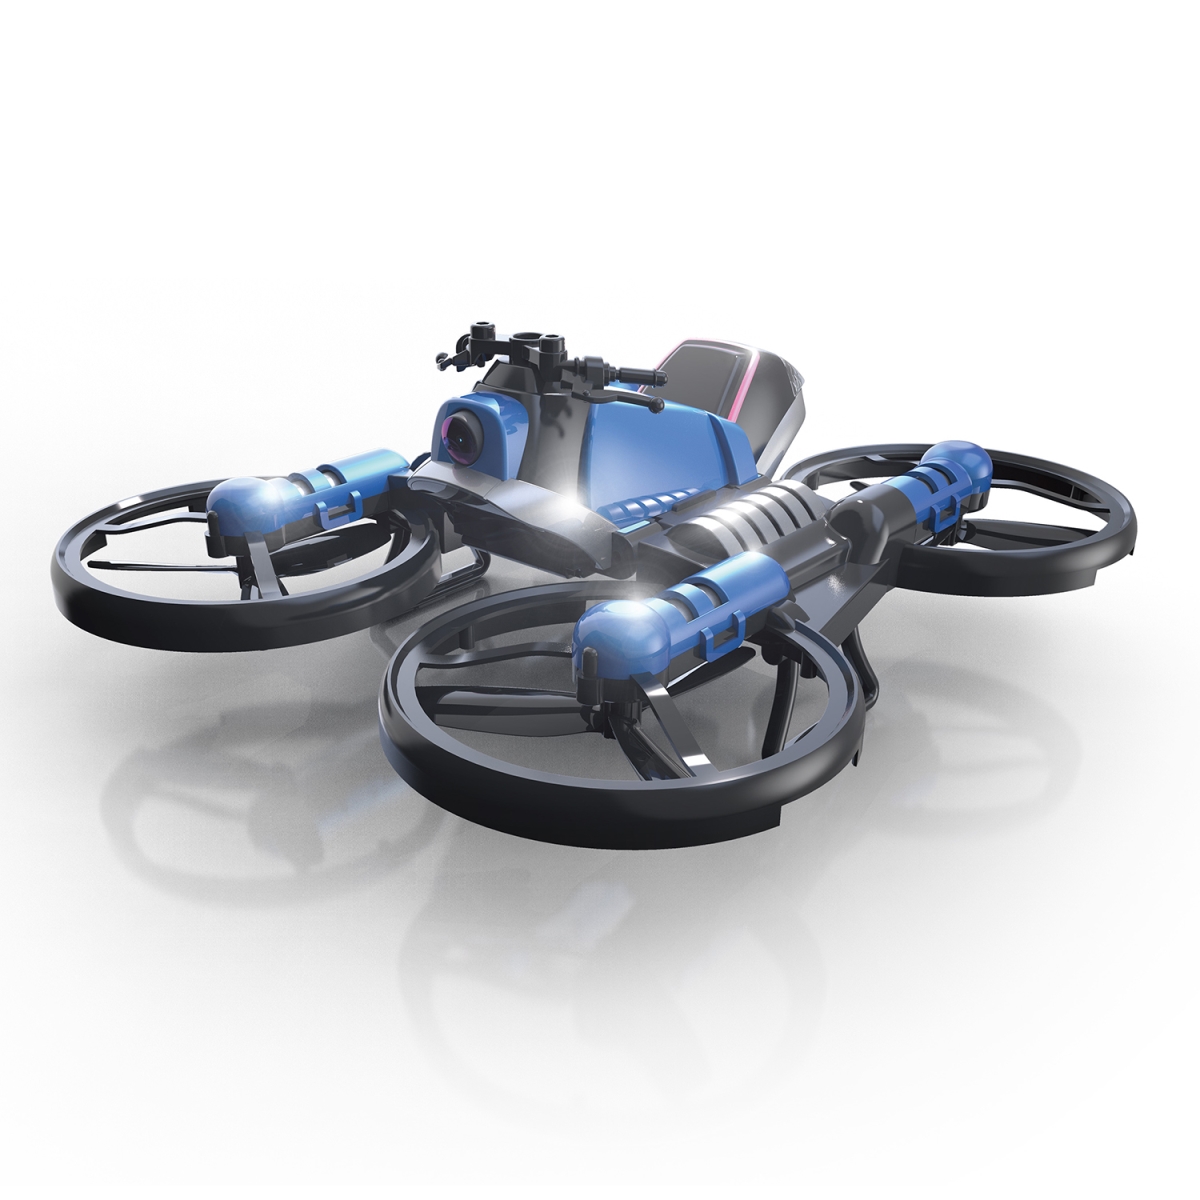 Picture of Odash JUPCR-17008 Drone 2 Bike with Wi-Fi Video USB